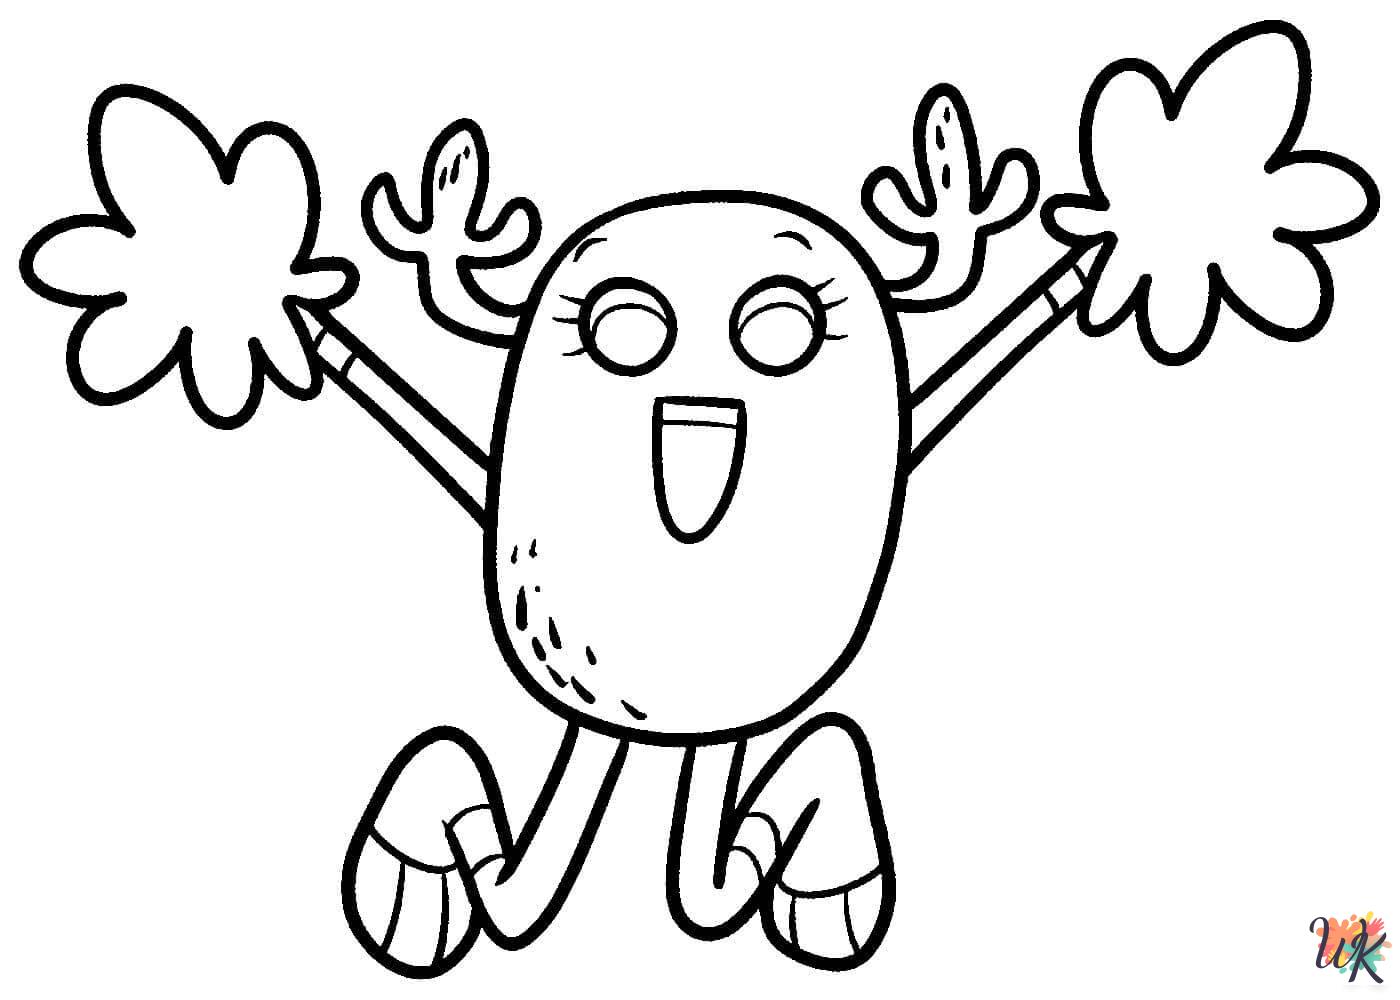 Gumball coloring pages to print